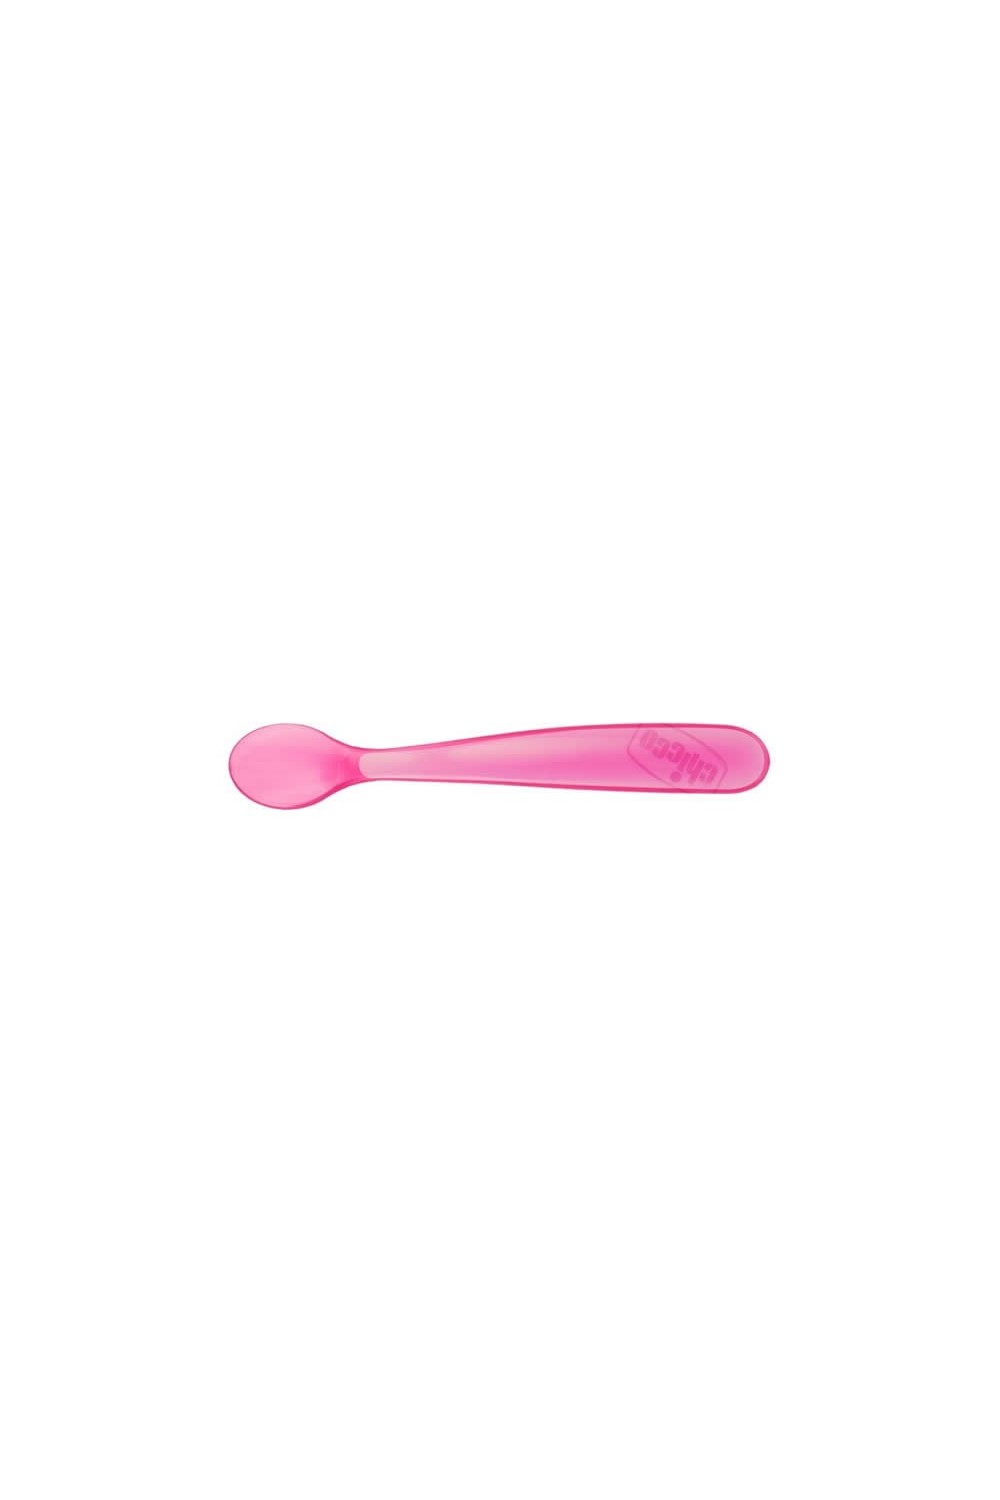 Chicco Duplo Soft Pink Silicone Spoon 6m+ 2 Units